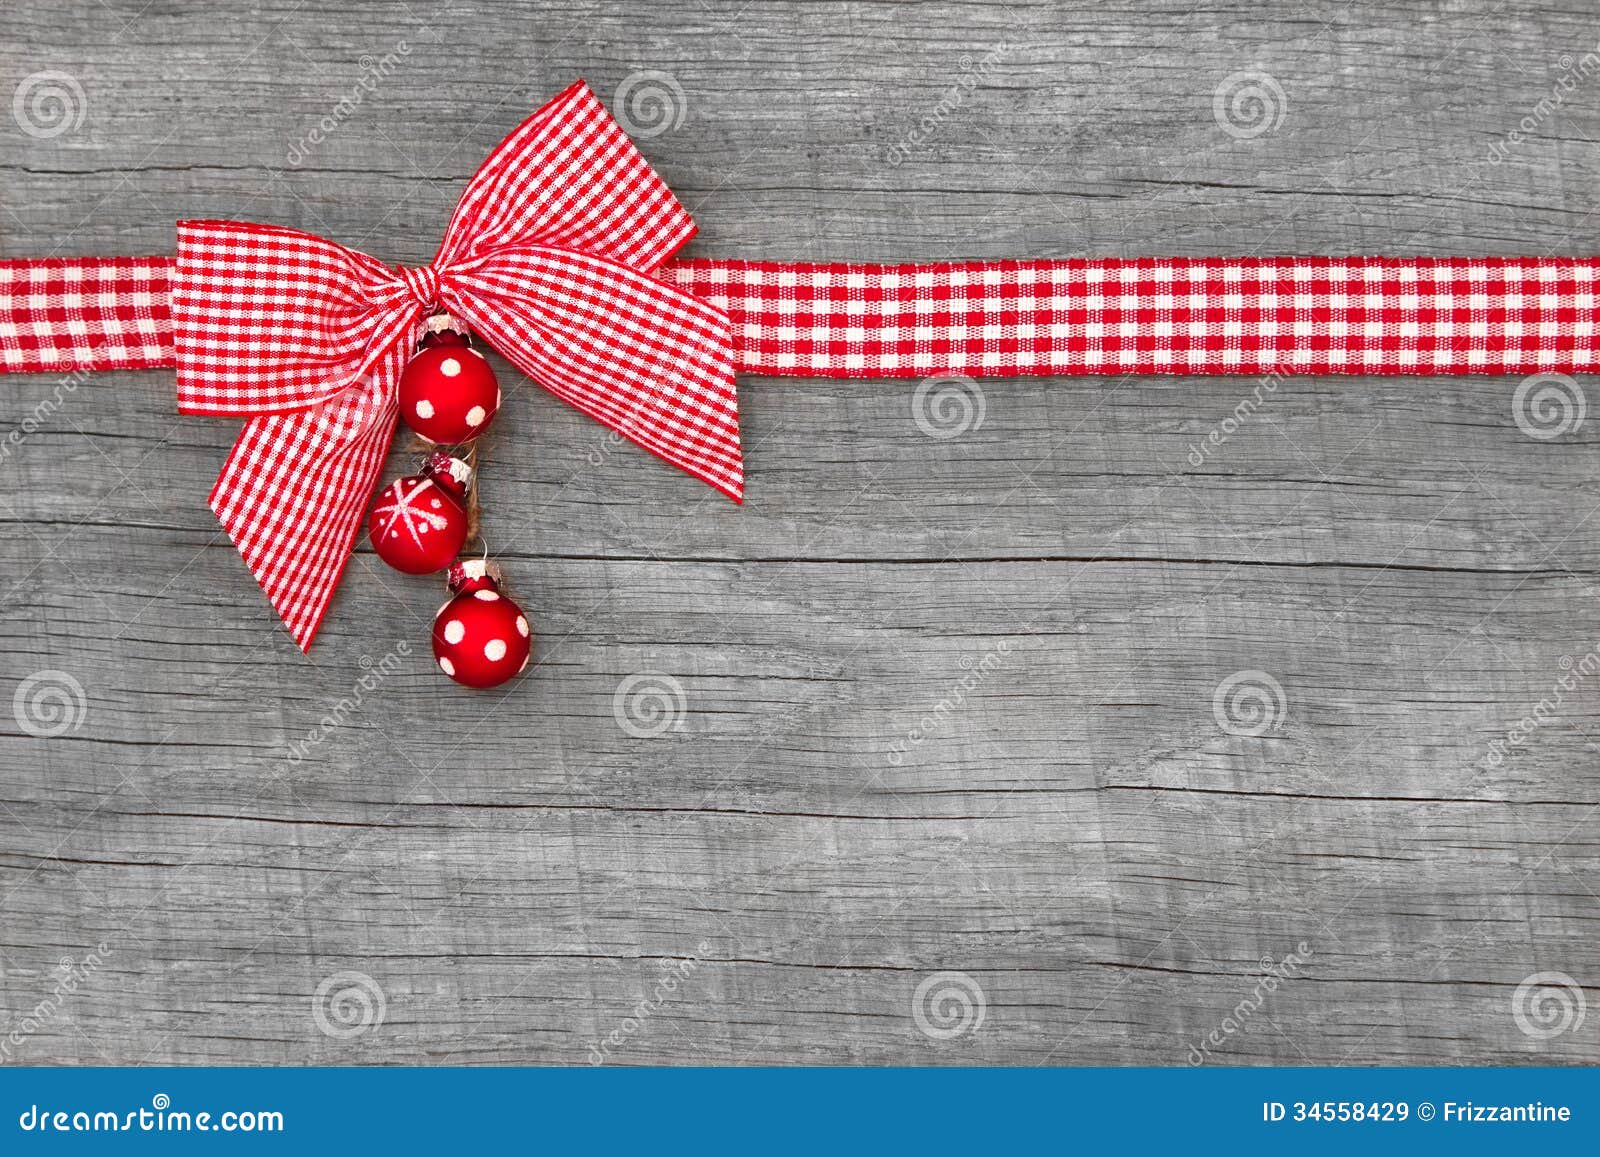 wooden red christmas background with a white checked ribbon